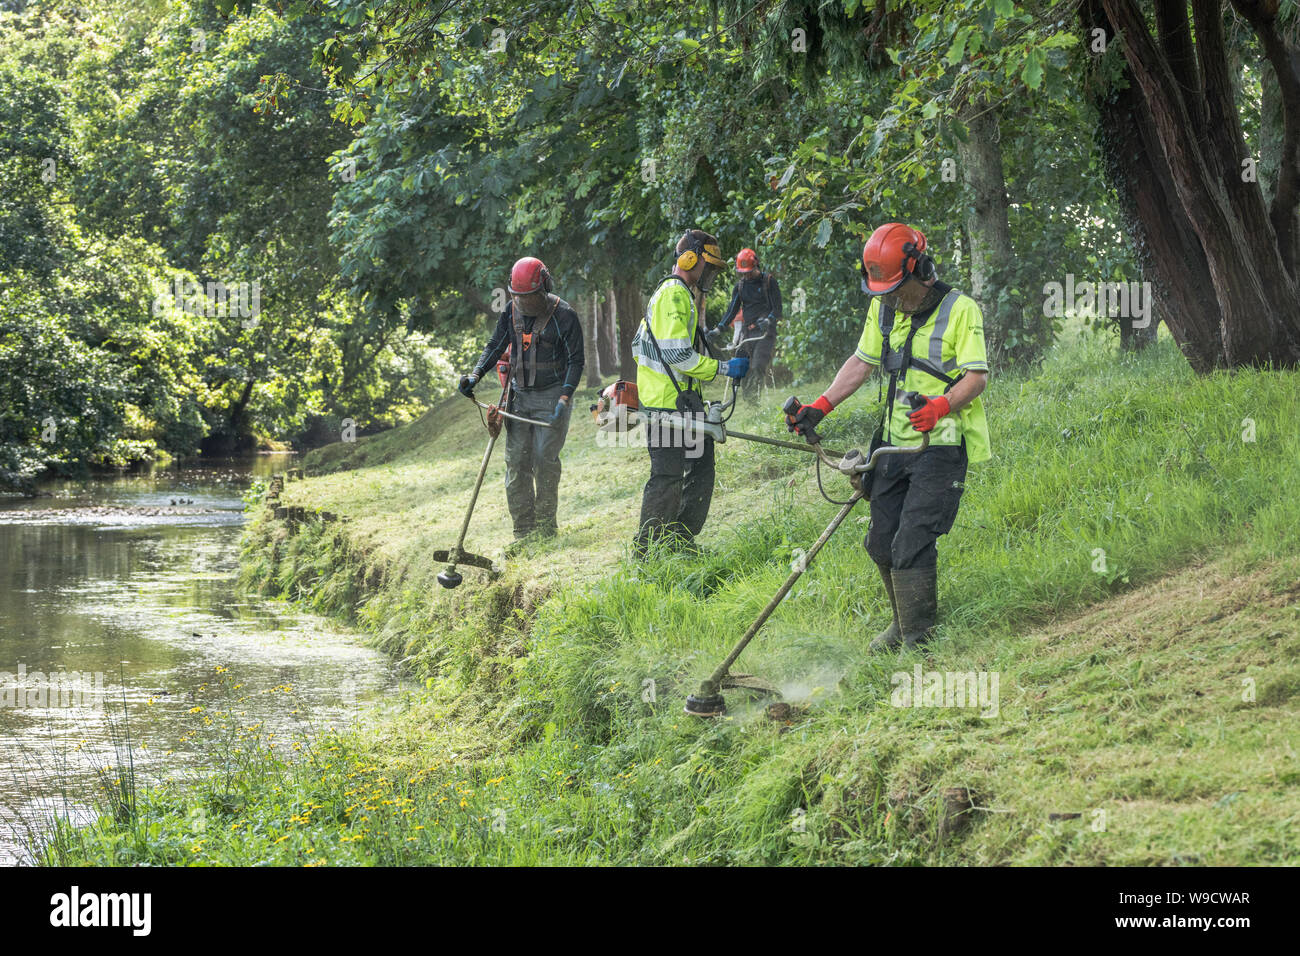 Members of Environment Agency groundwork team strimming bank of River Fowey, Lostwithiel, Cornwall. Metaphor cut short, neat and tidy, high vis jacket Stock Photo